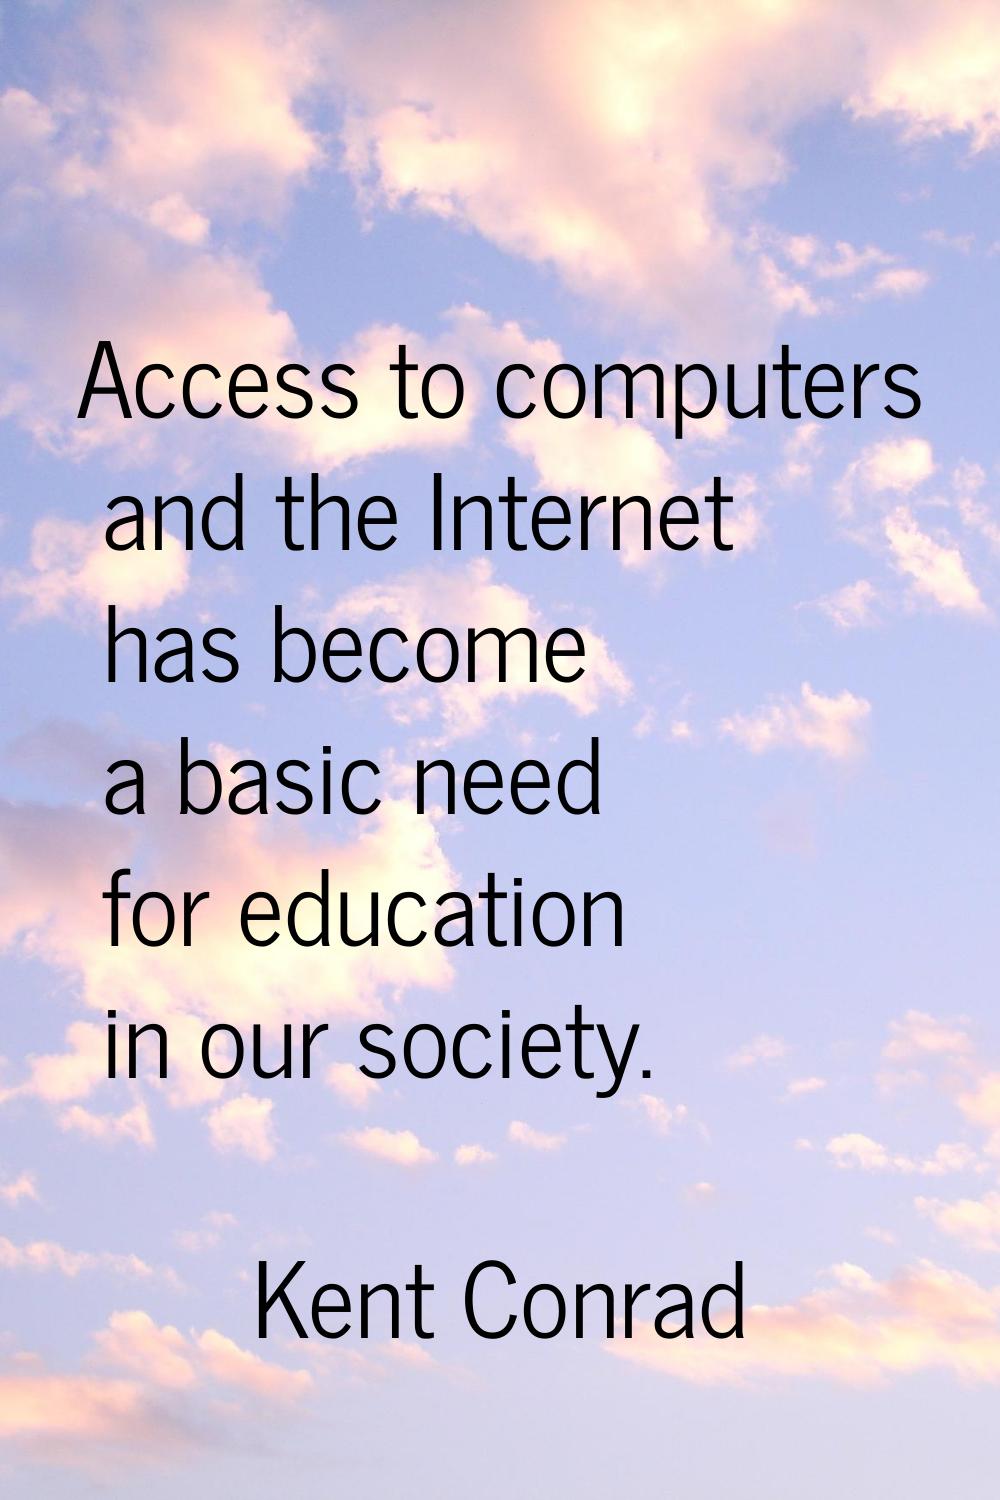 Access to computers and the Internet has become a basic need for education in our society.